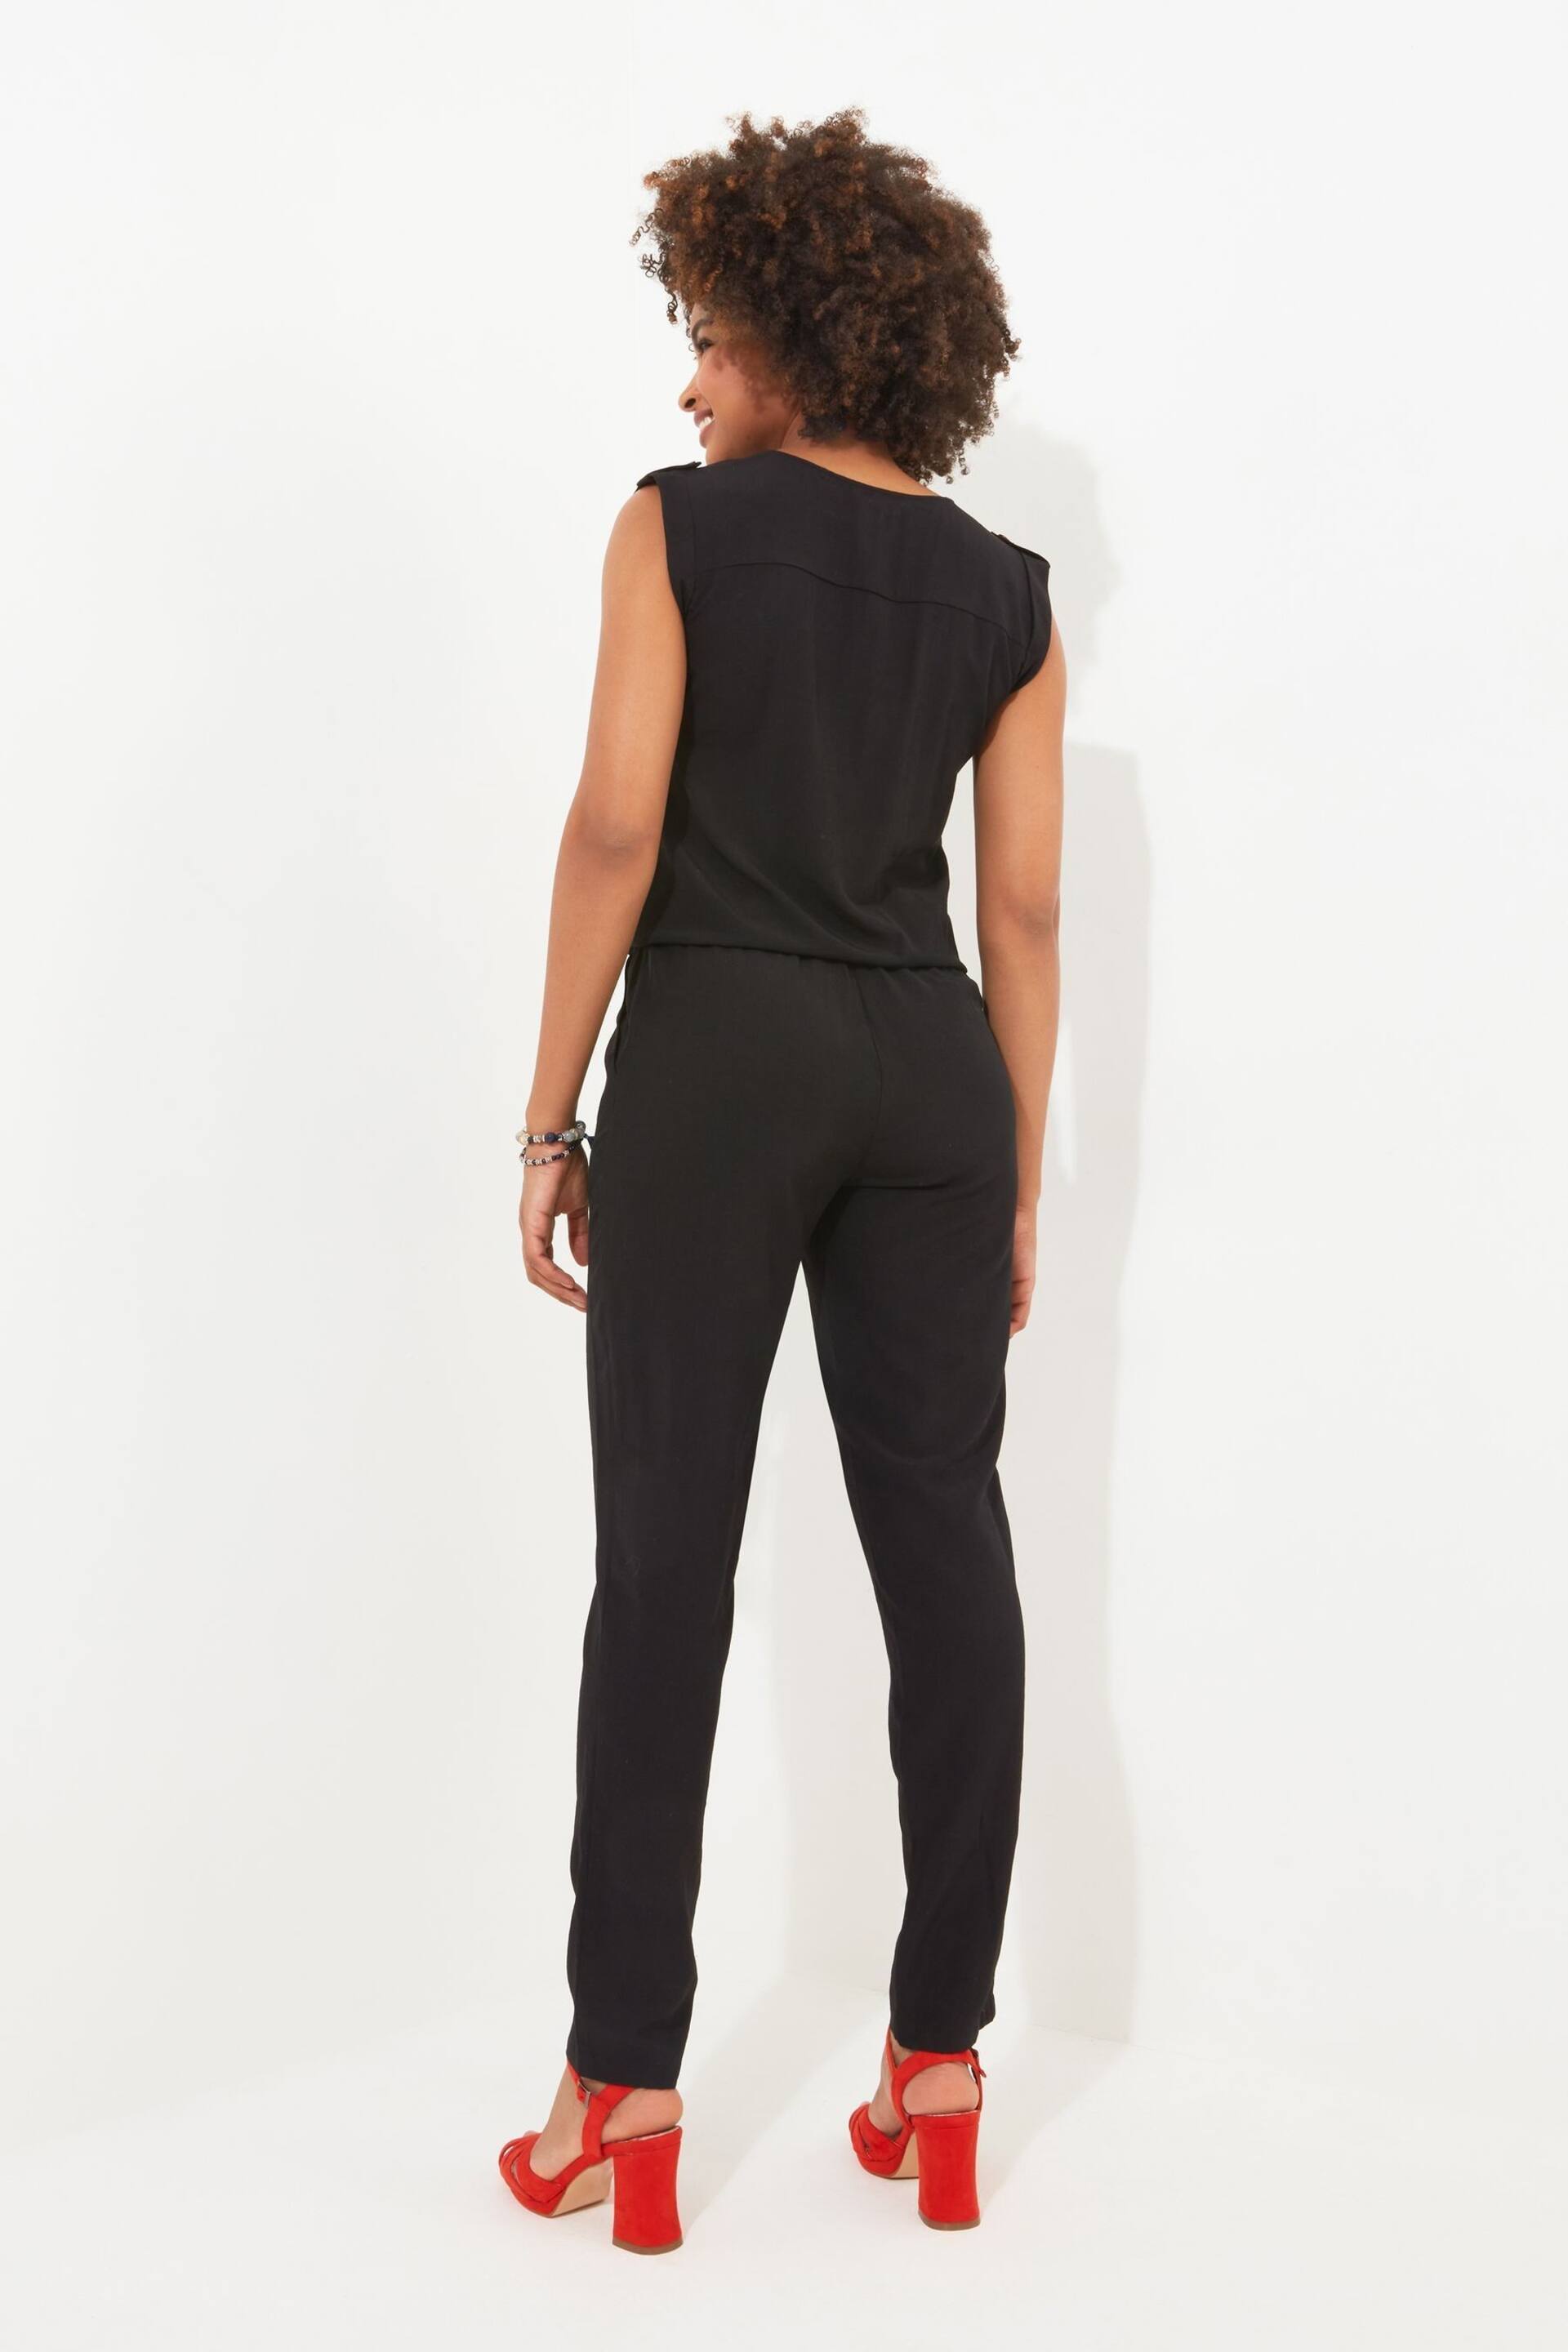 Joe Browns Black Relaxed Fit Zip Front Jumpsuit - Image 2 of 6